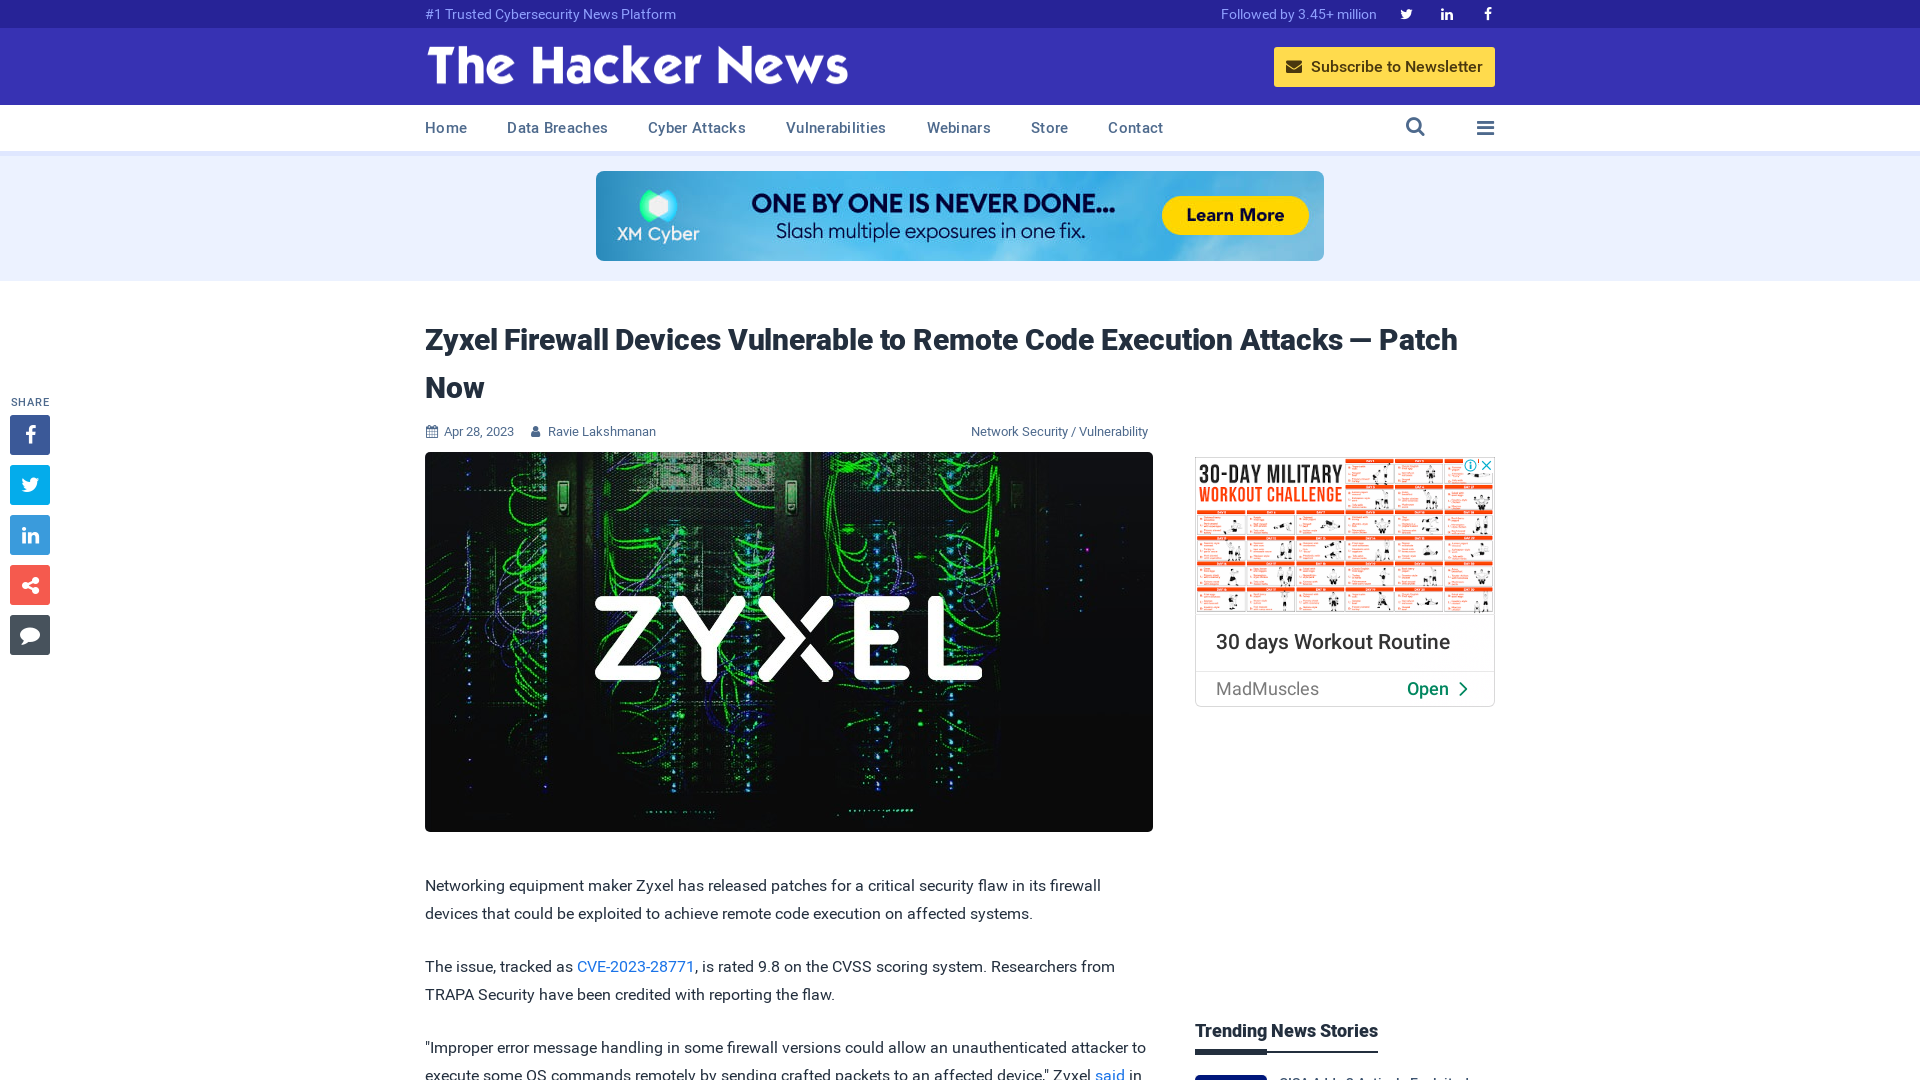 Zyxel Firewall Devices Vulnerable to Remote Code Execution Attacks — Patch Now